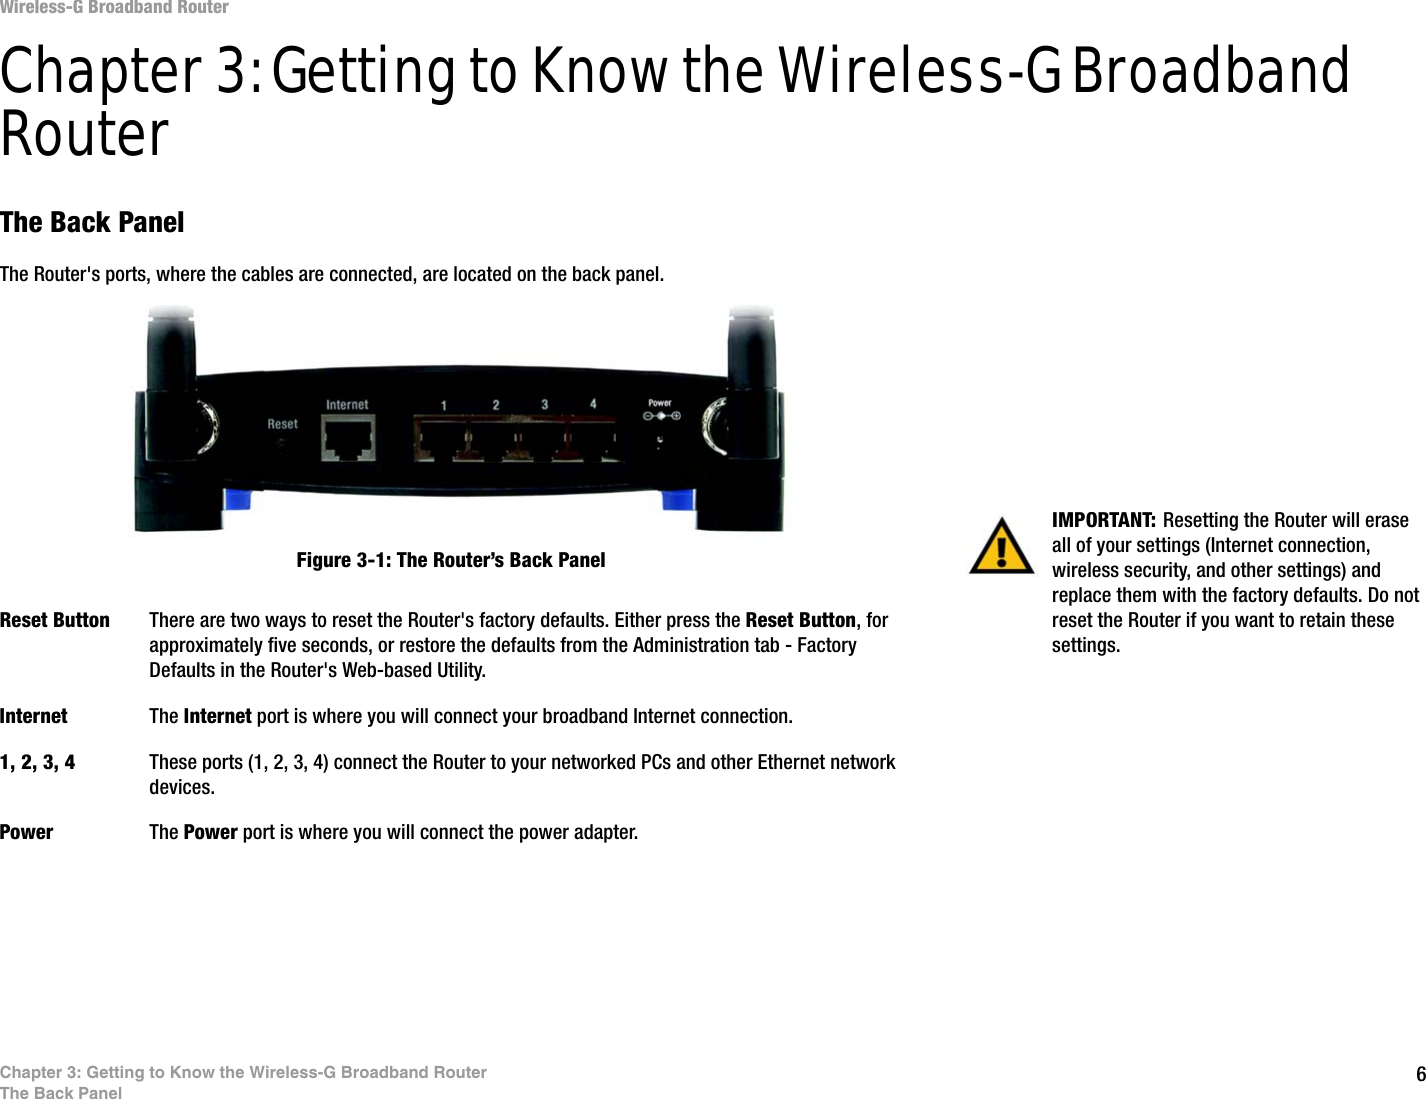 6Chapter 3: Getting to Know the Wireless-G Broadband RouterThe Back PanelWireless-G Broadband RouterChapter 3: Getting to Know the Wireless-G Broadband RouterThe Back PanelThe Router&apos;s ports, where the cables are connected, are located on the back panel.Reset Button There are two ways to reset the Router&apos;s factory defaults. Either press the Reset Button, for approximately five seconds, or restore the defaults from the Administration tab - Factory Defaults in the Router&apos;s Web-based Utility.Internet The Internet port is where you will connect your broadband Internet connection.1, 2, 3, 4 These ports (1, 2, 3, 4) connect the Router to your networked PCs and other Ethernet network devices.Power The Power port is where you will connect the power adapter.IMPORTANT: Resetting the Router will erase all of your settings (Internet connection, wireless security, and other settings) and replace them with the factory defaults. Do not reset the Router if you want to retain these settings.Figure 3-1: The Router’s Back Panel